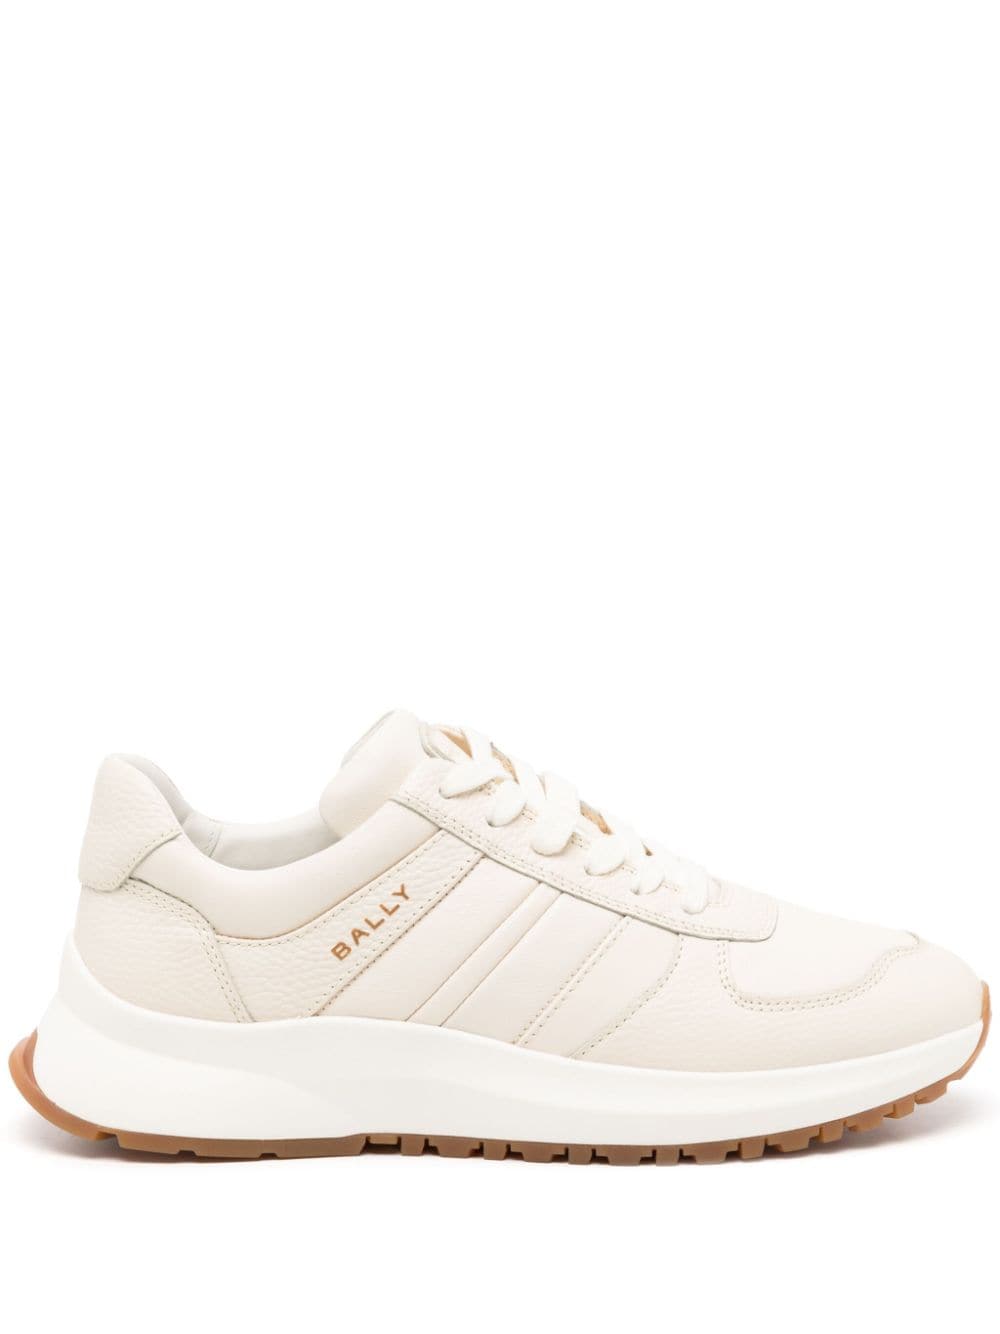 Bally Outline Leather Sneakers In Neutrals